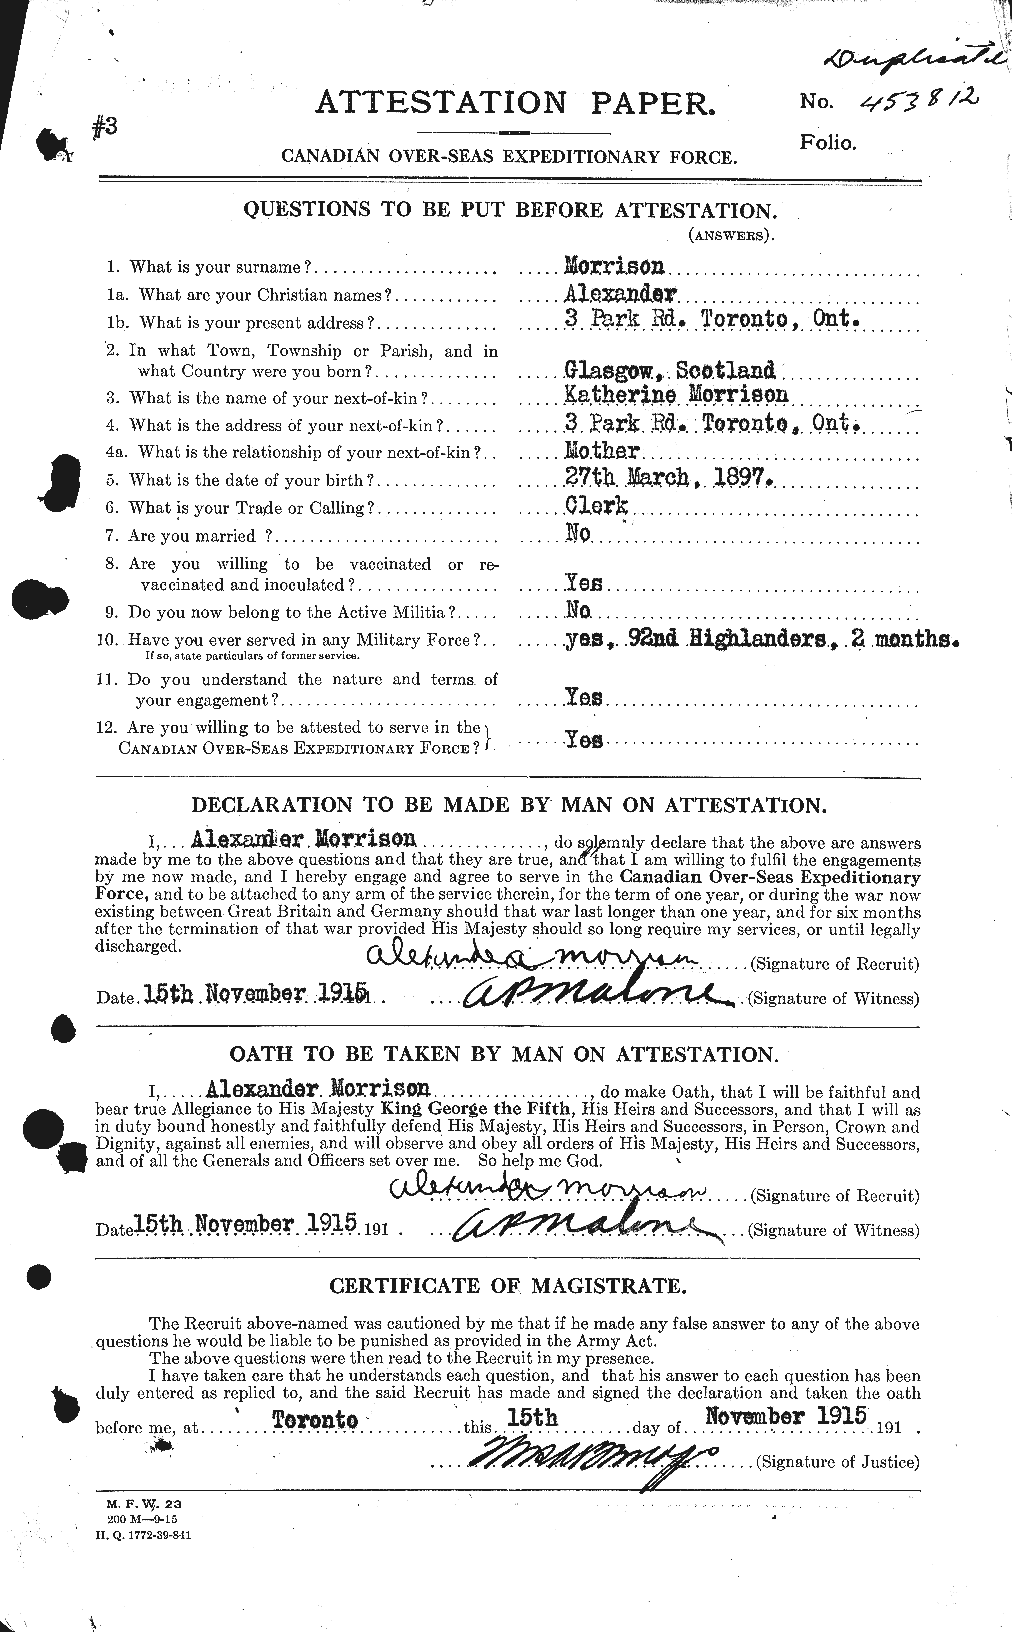 Personnel Records of the First World War - CEF 510994a